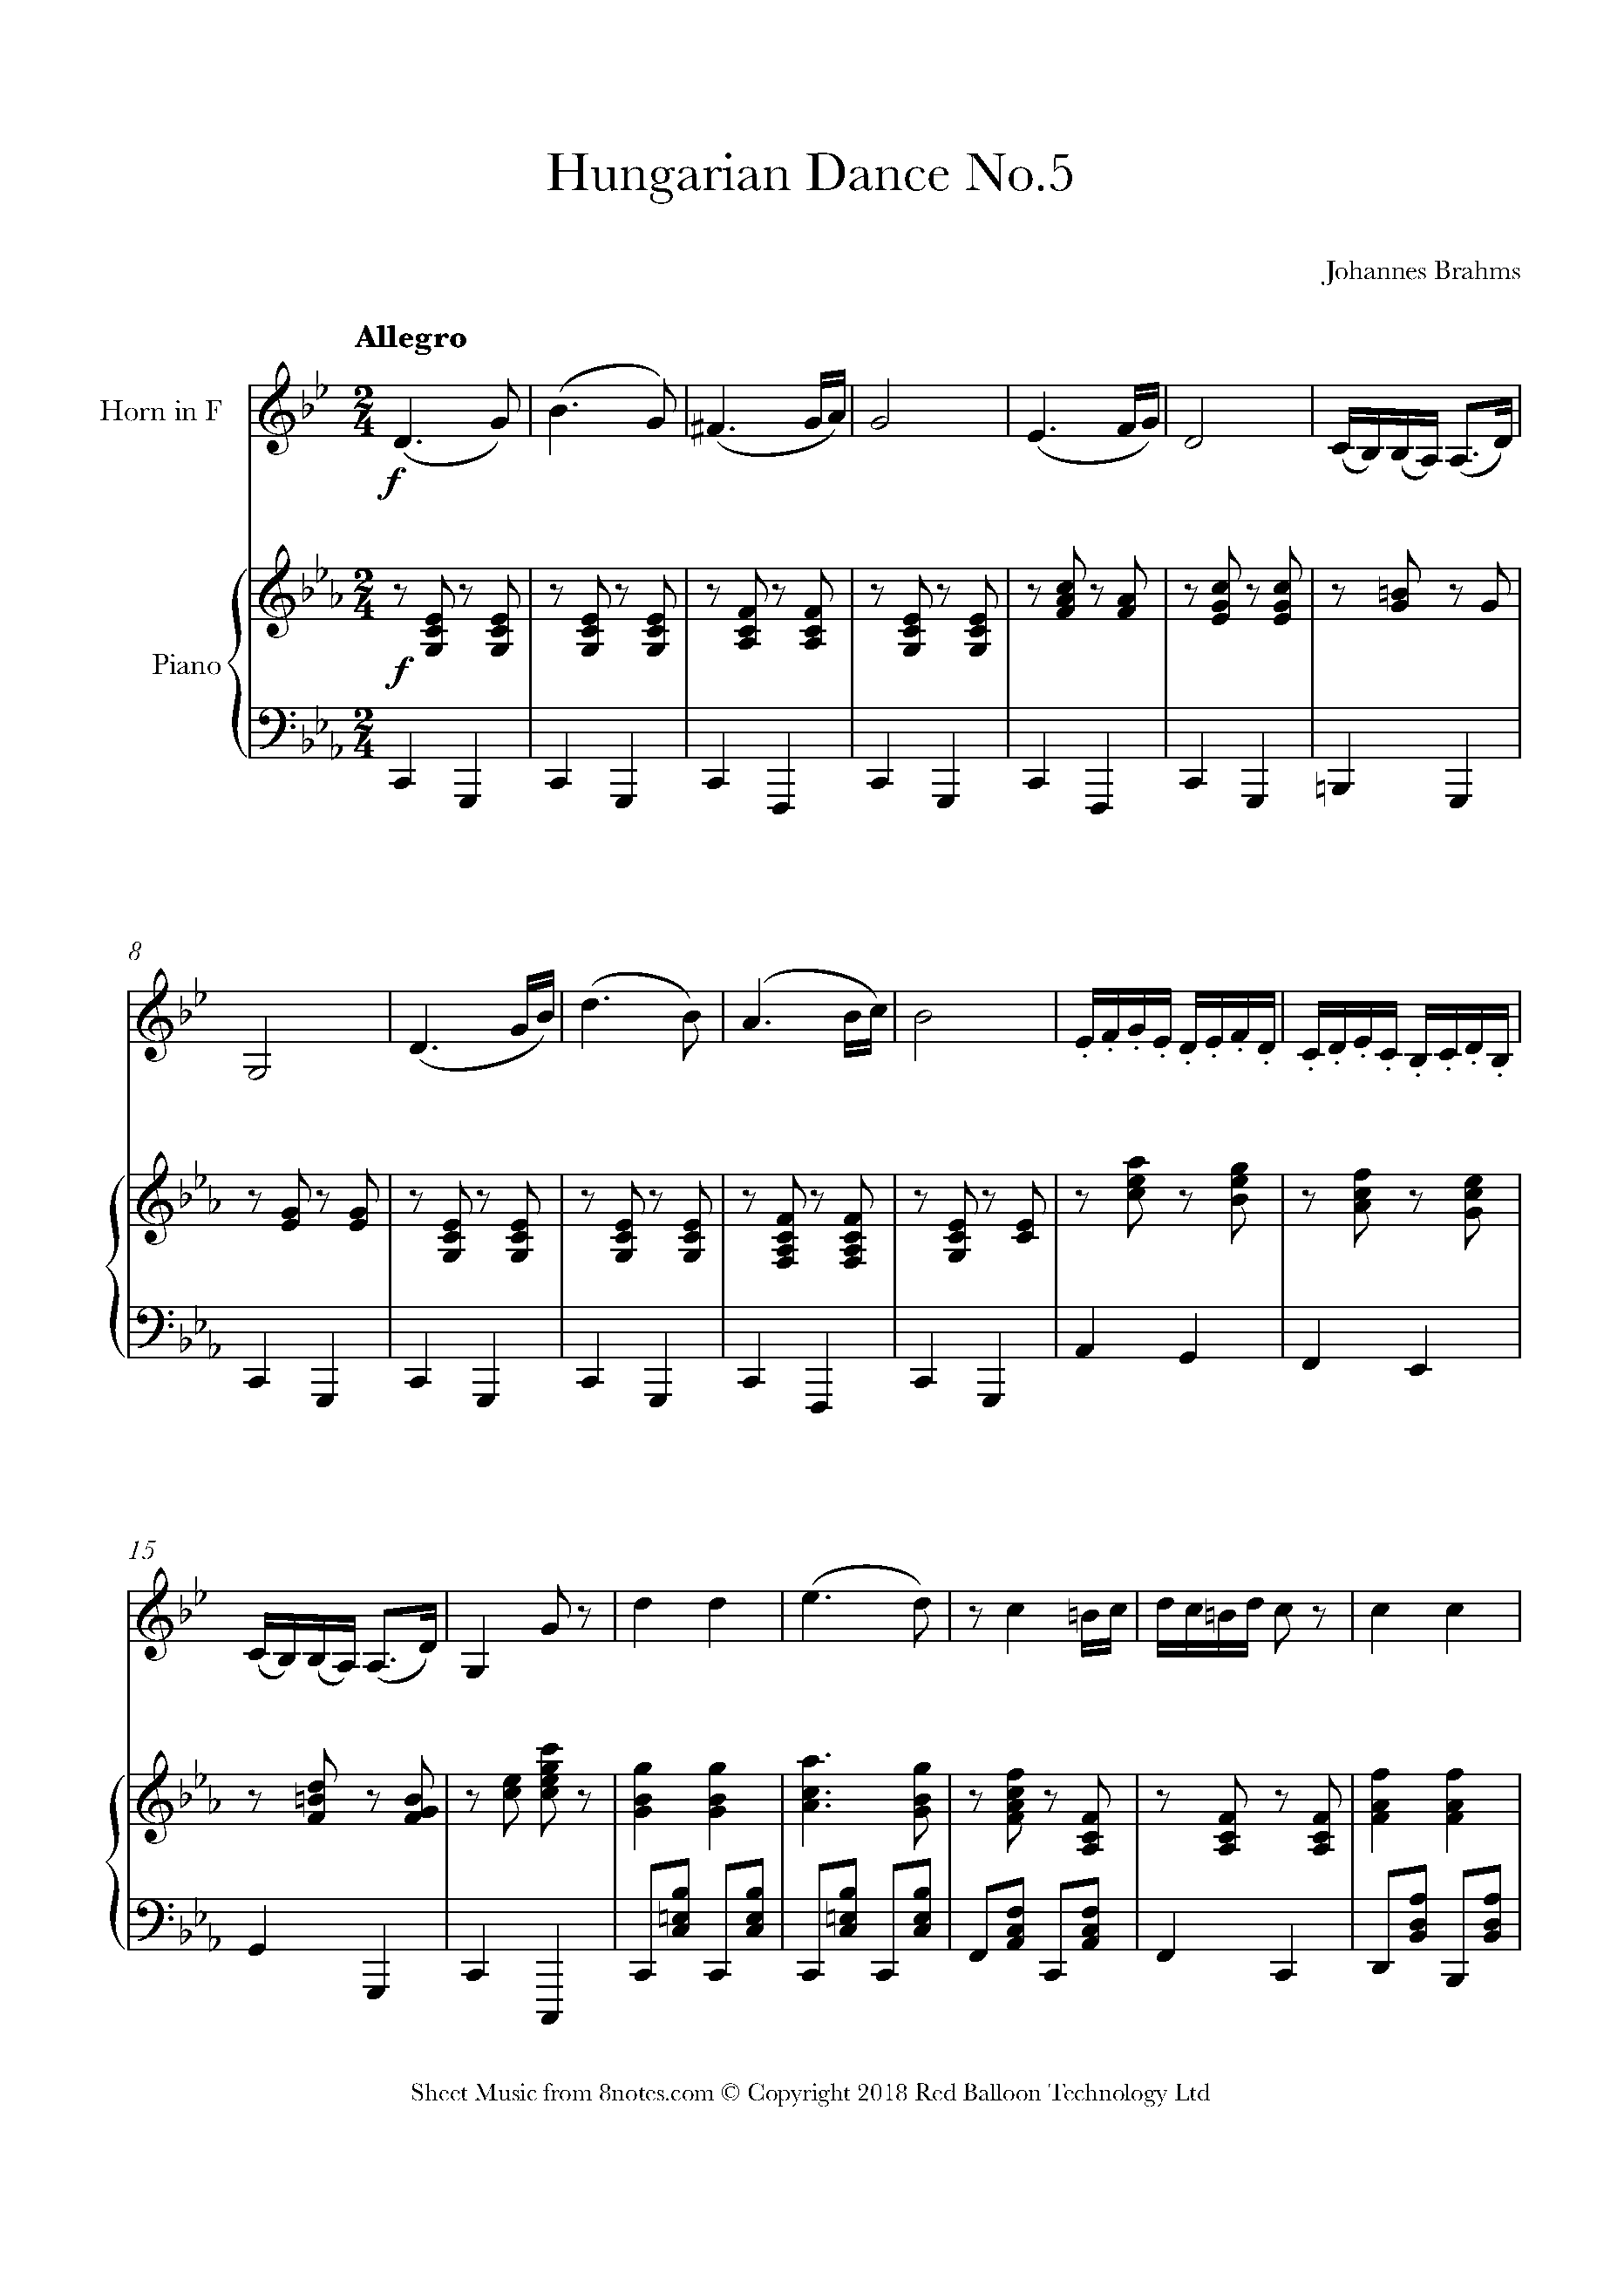 Brahms, Johannes - Hungarian Dance No.5 Sheet music for French 8notes.com